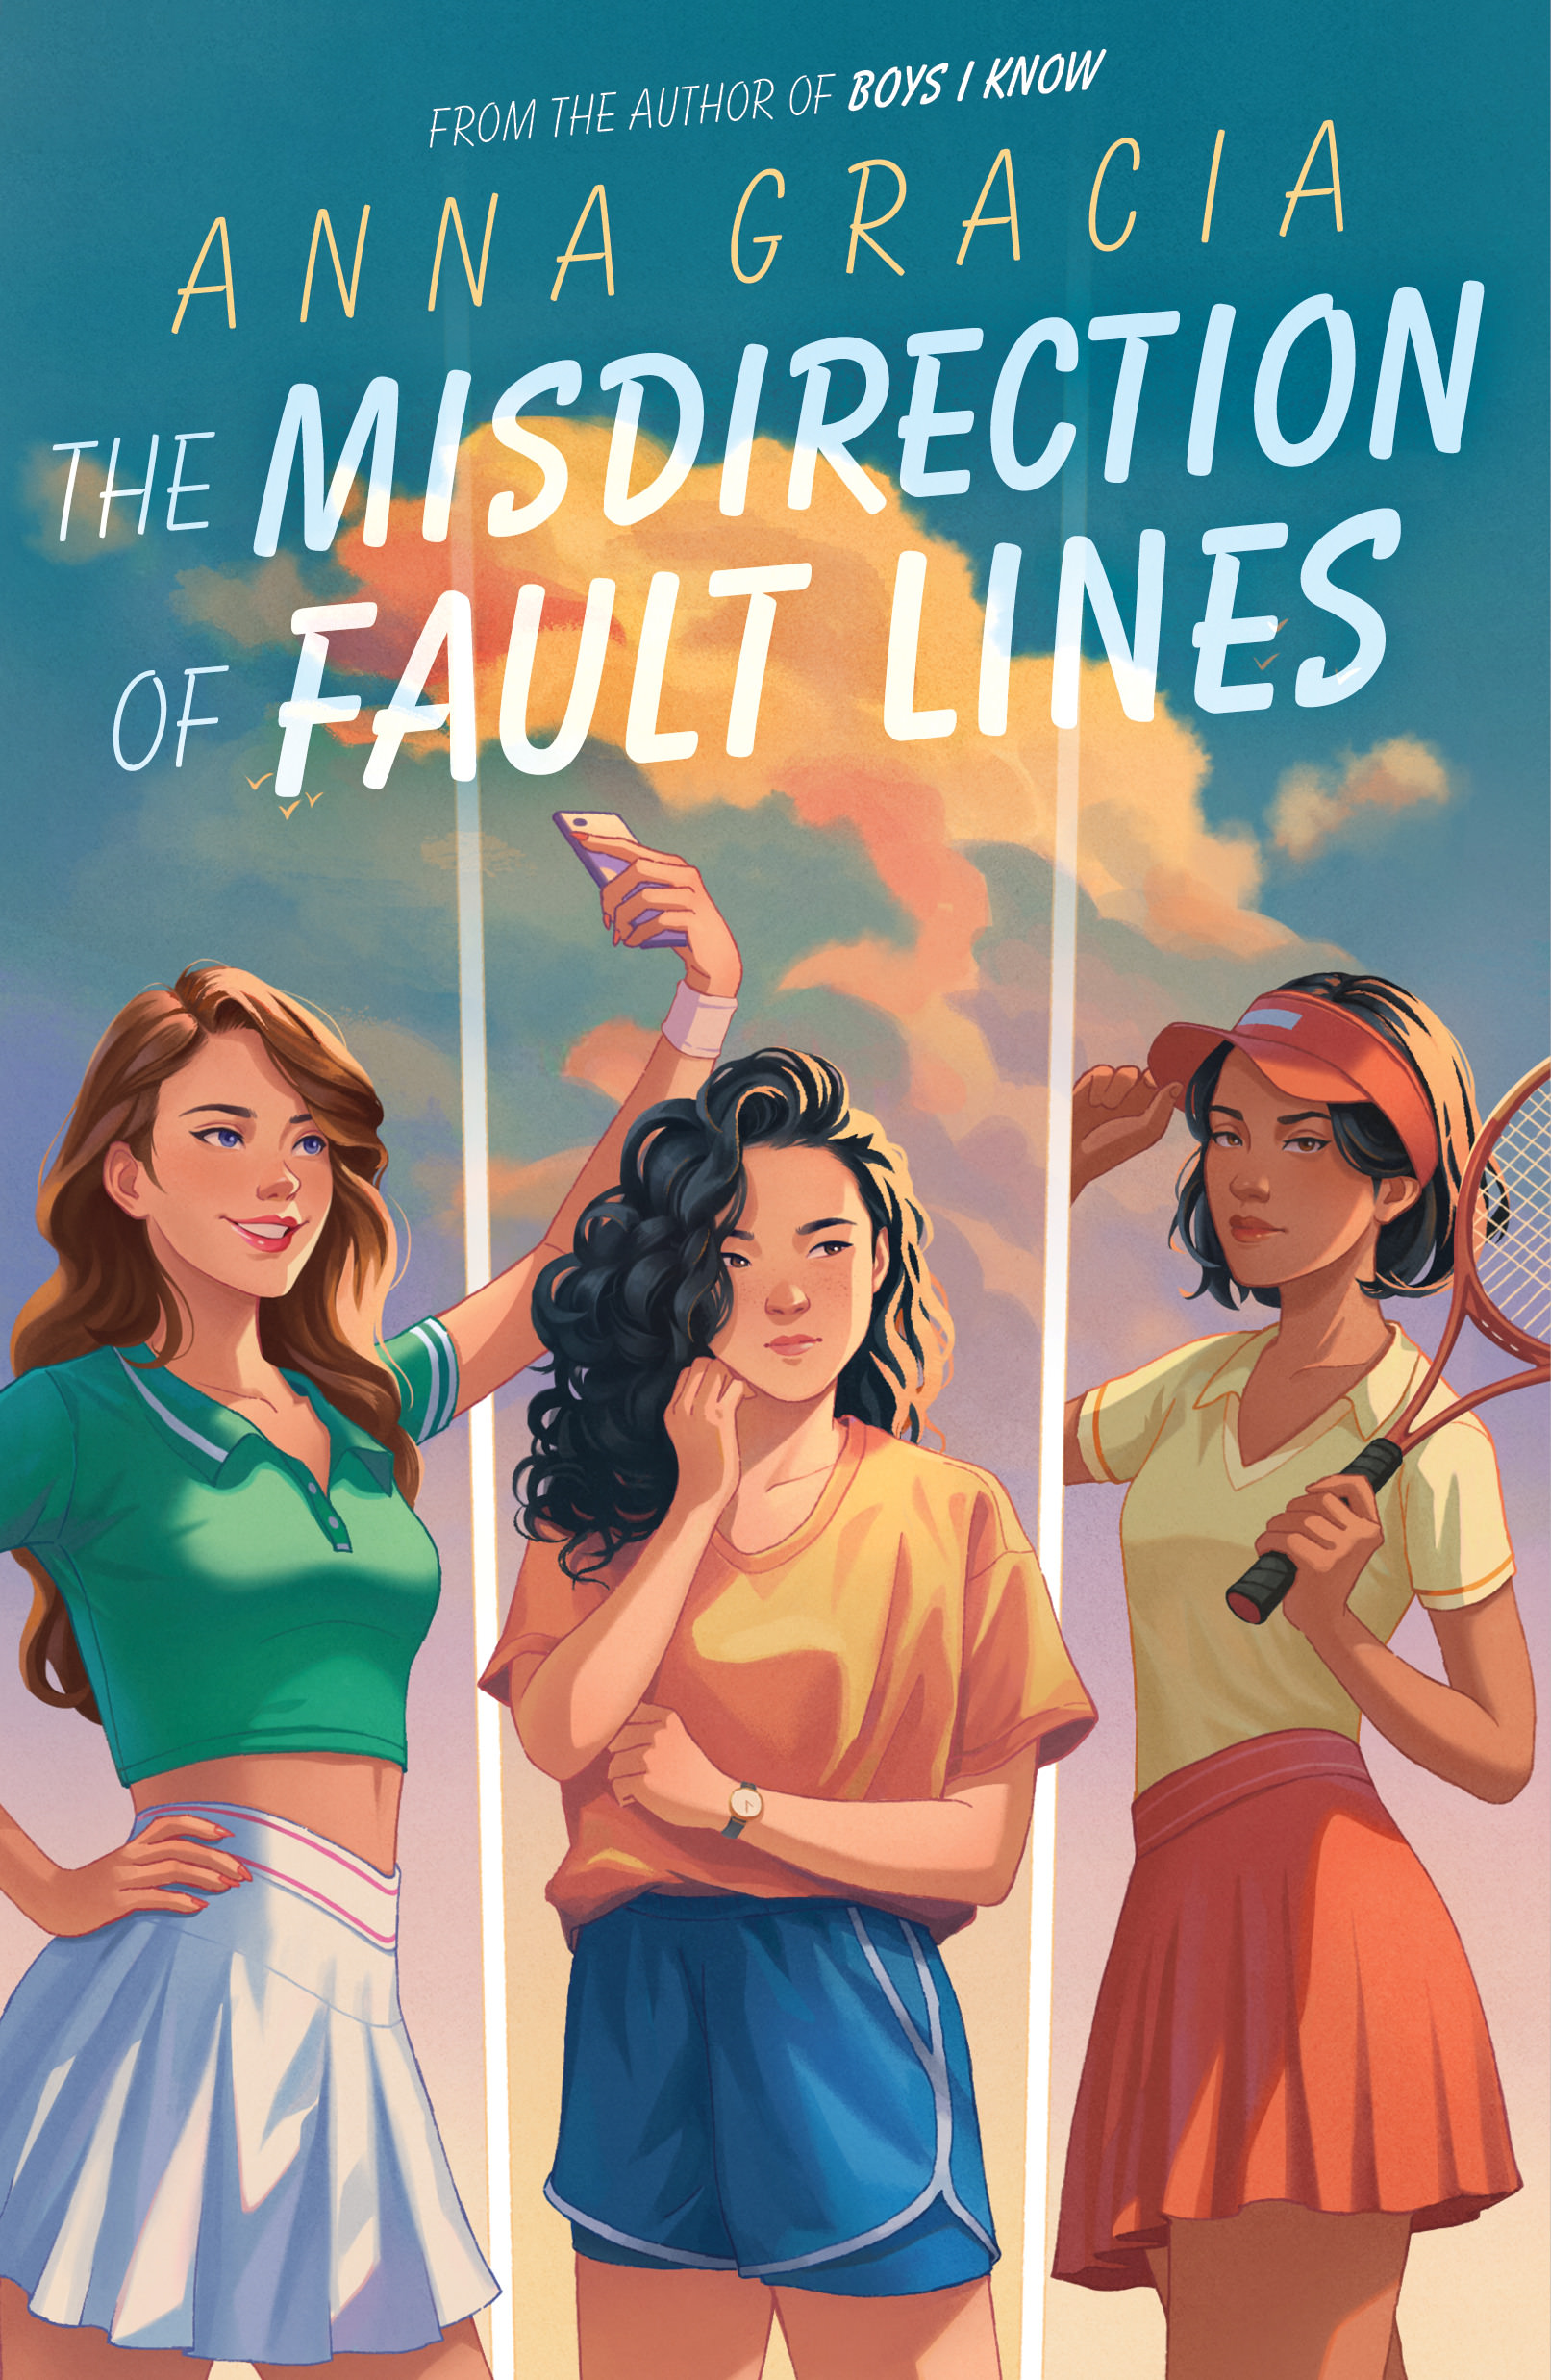 The Misdirection of Fault Lines by Anna Gracia